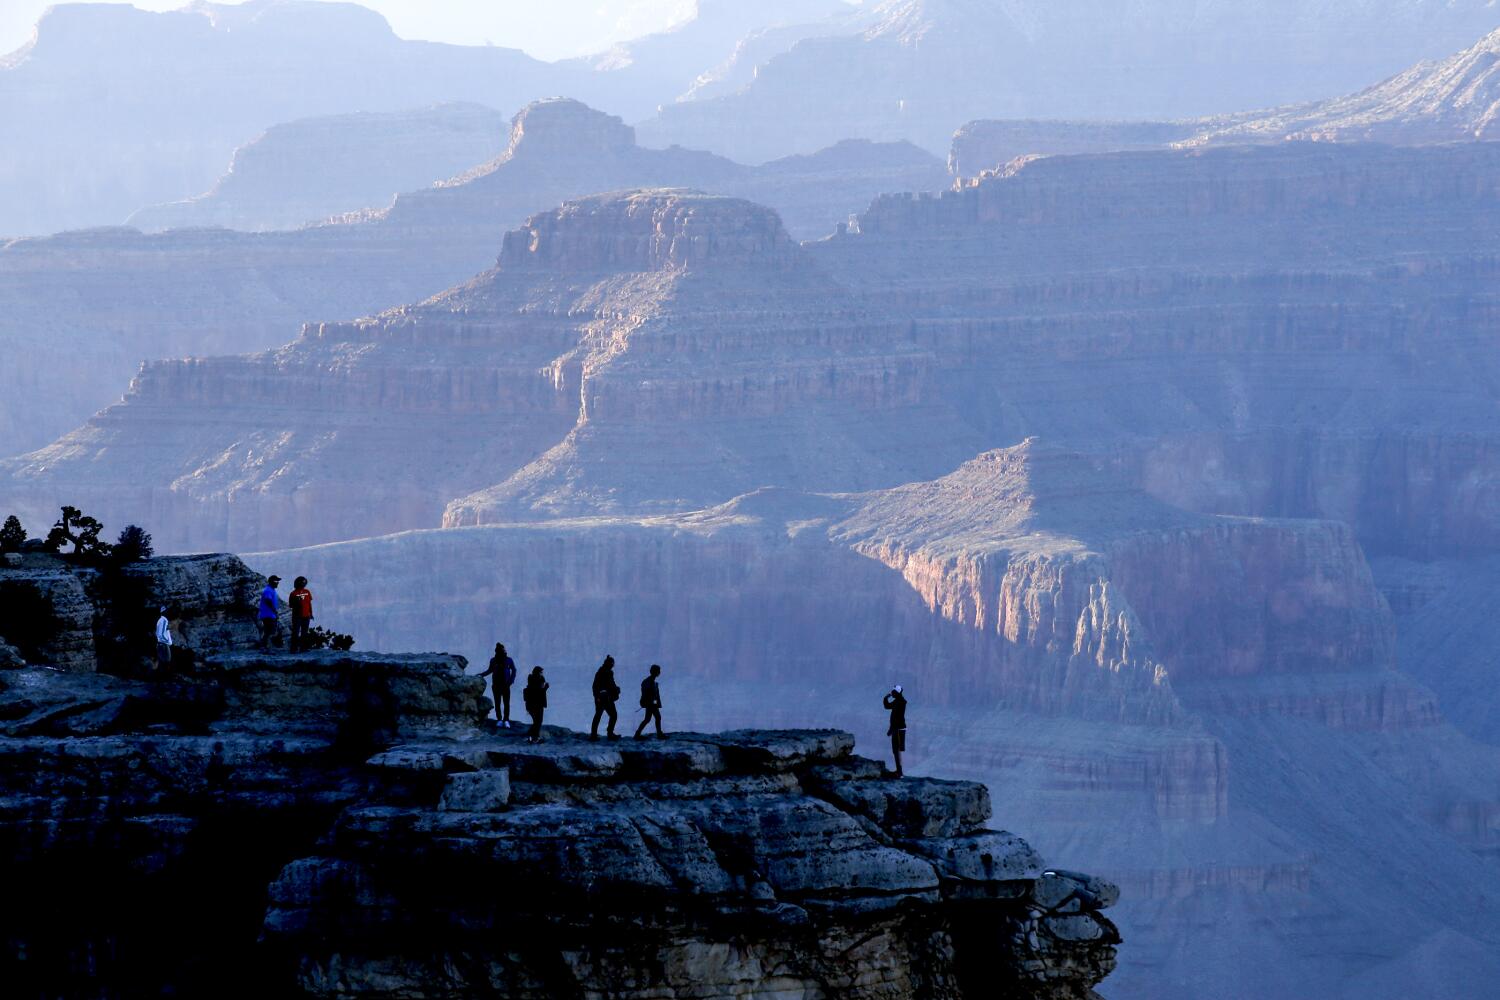 Man dies while trying to hike across Grand Canyon amid high heat